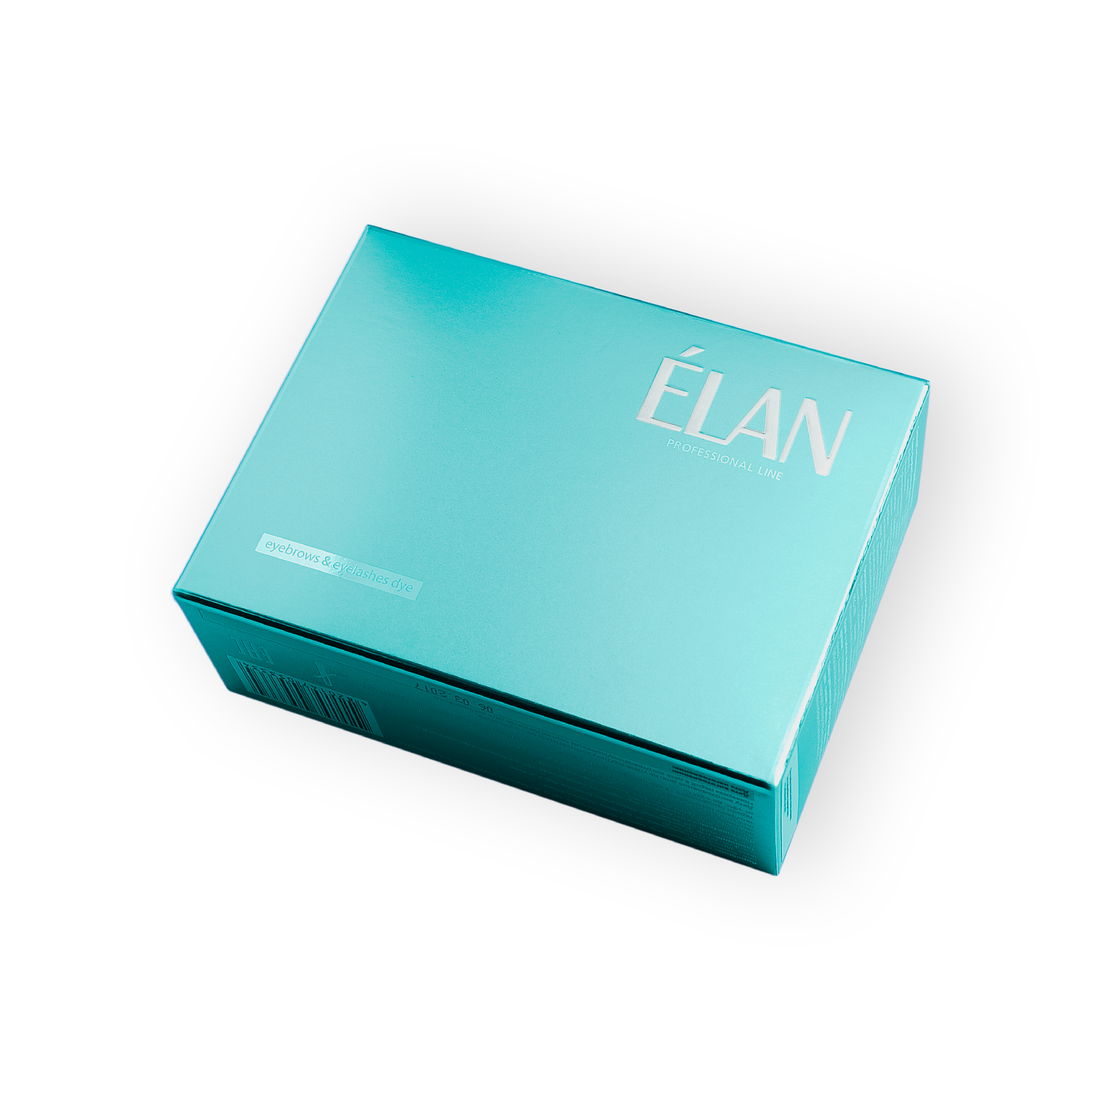 ÉLAN - Eyebrow gel tint with Oxidant, 02 Dark Brown (One box is enough for 150-200 treatments)